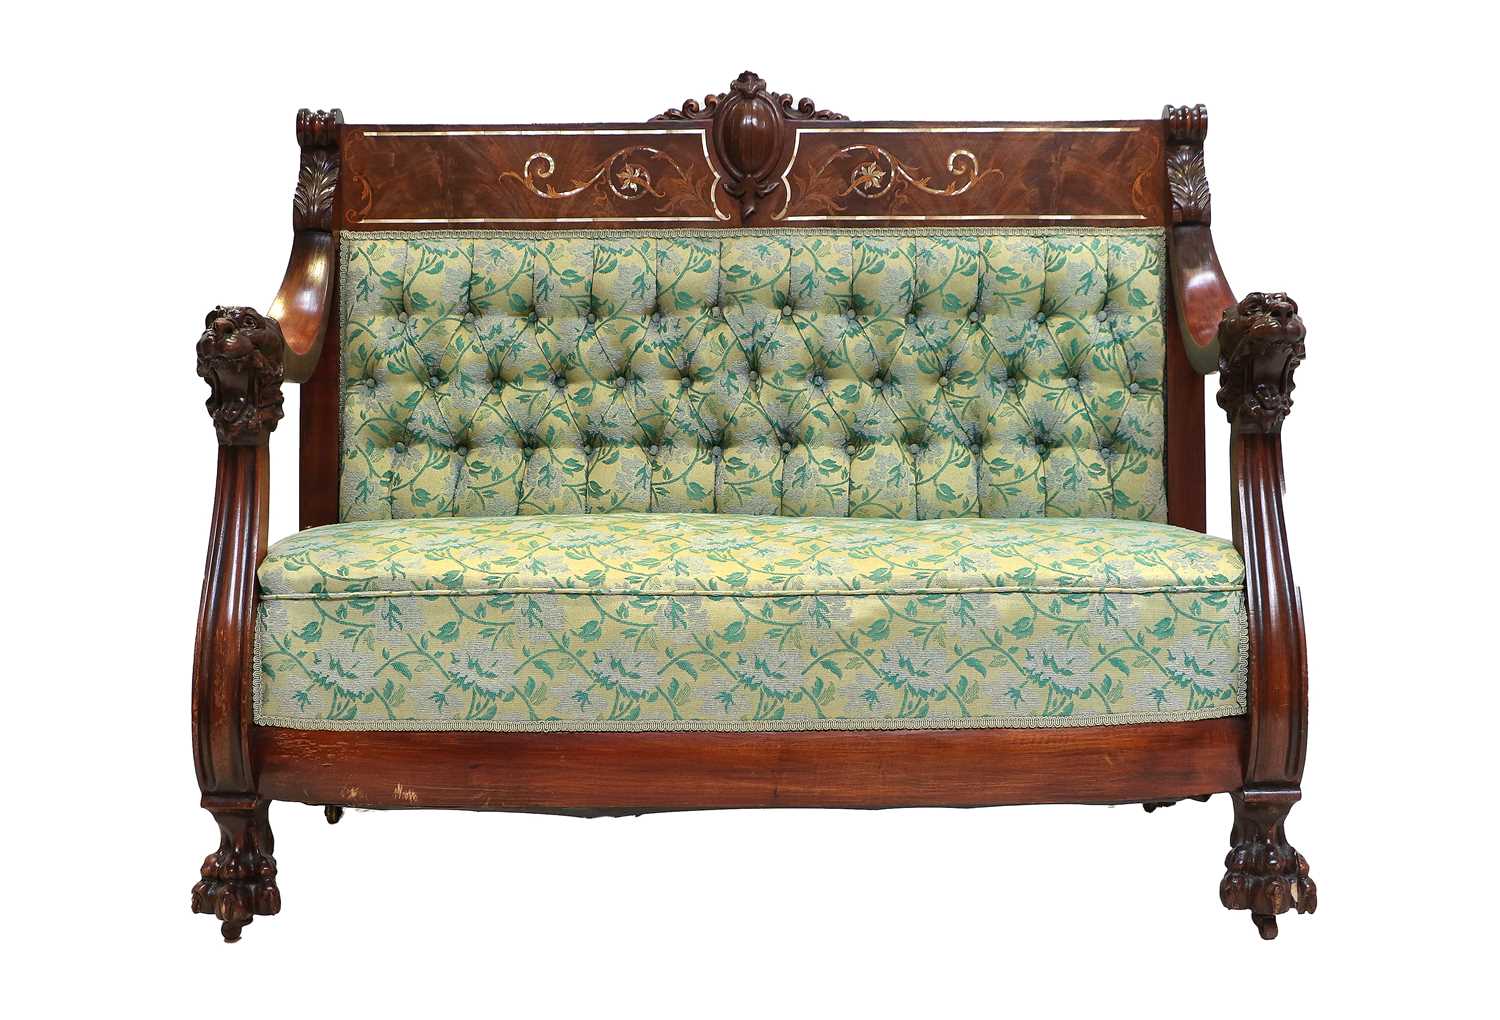 A Late 19th Century American Carved Mahogany, Marquetry and Mother-of-Pearl-Inlaid Two-Seater - Image 2 of 4